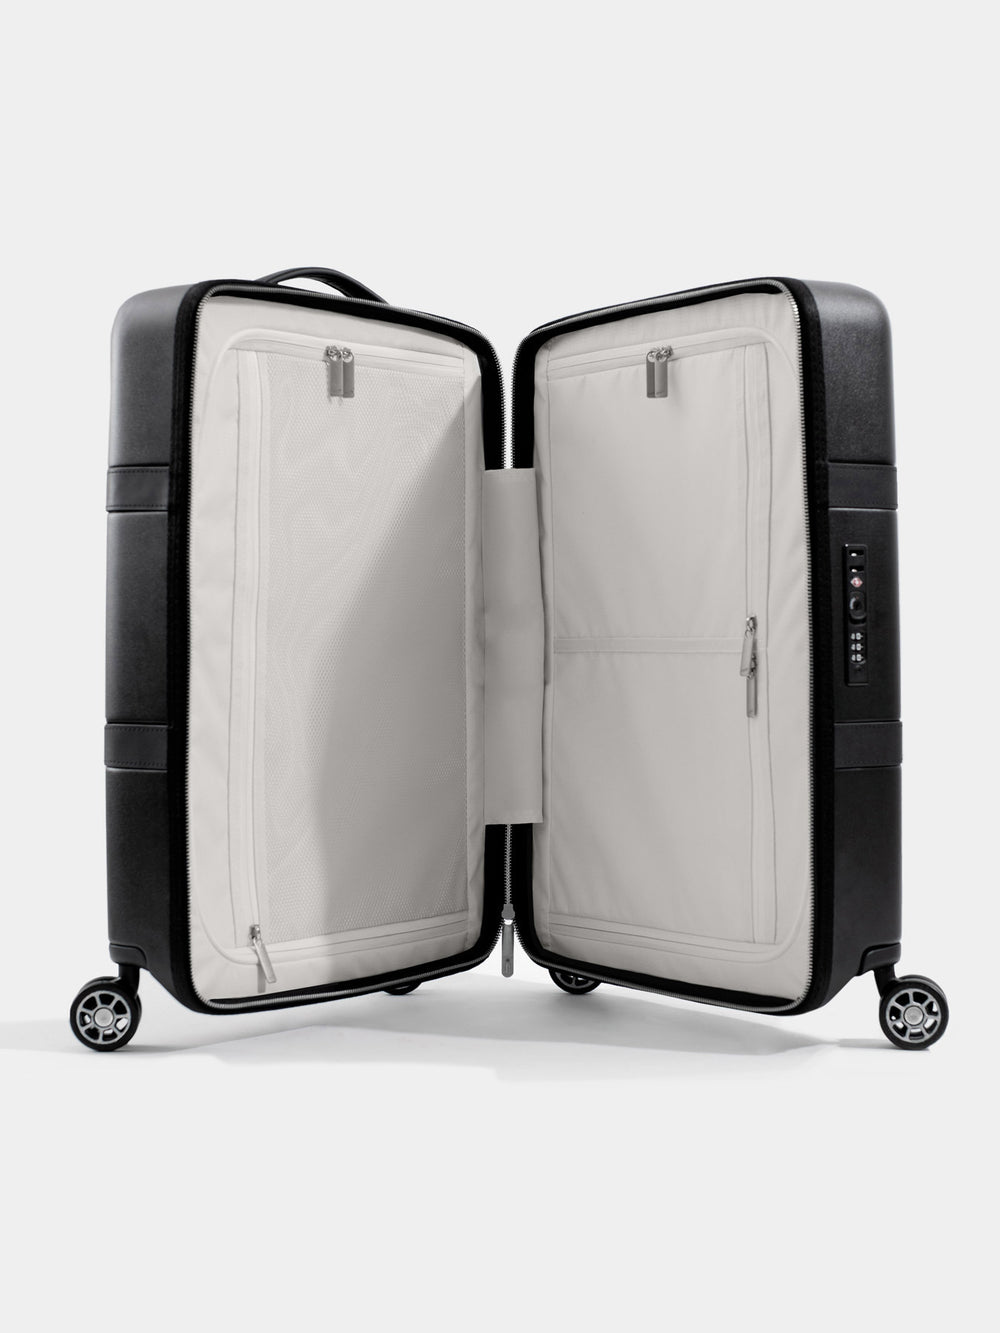 p55 black carry-on luggage interior open 